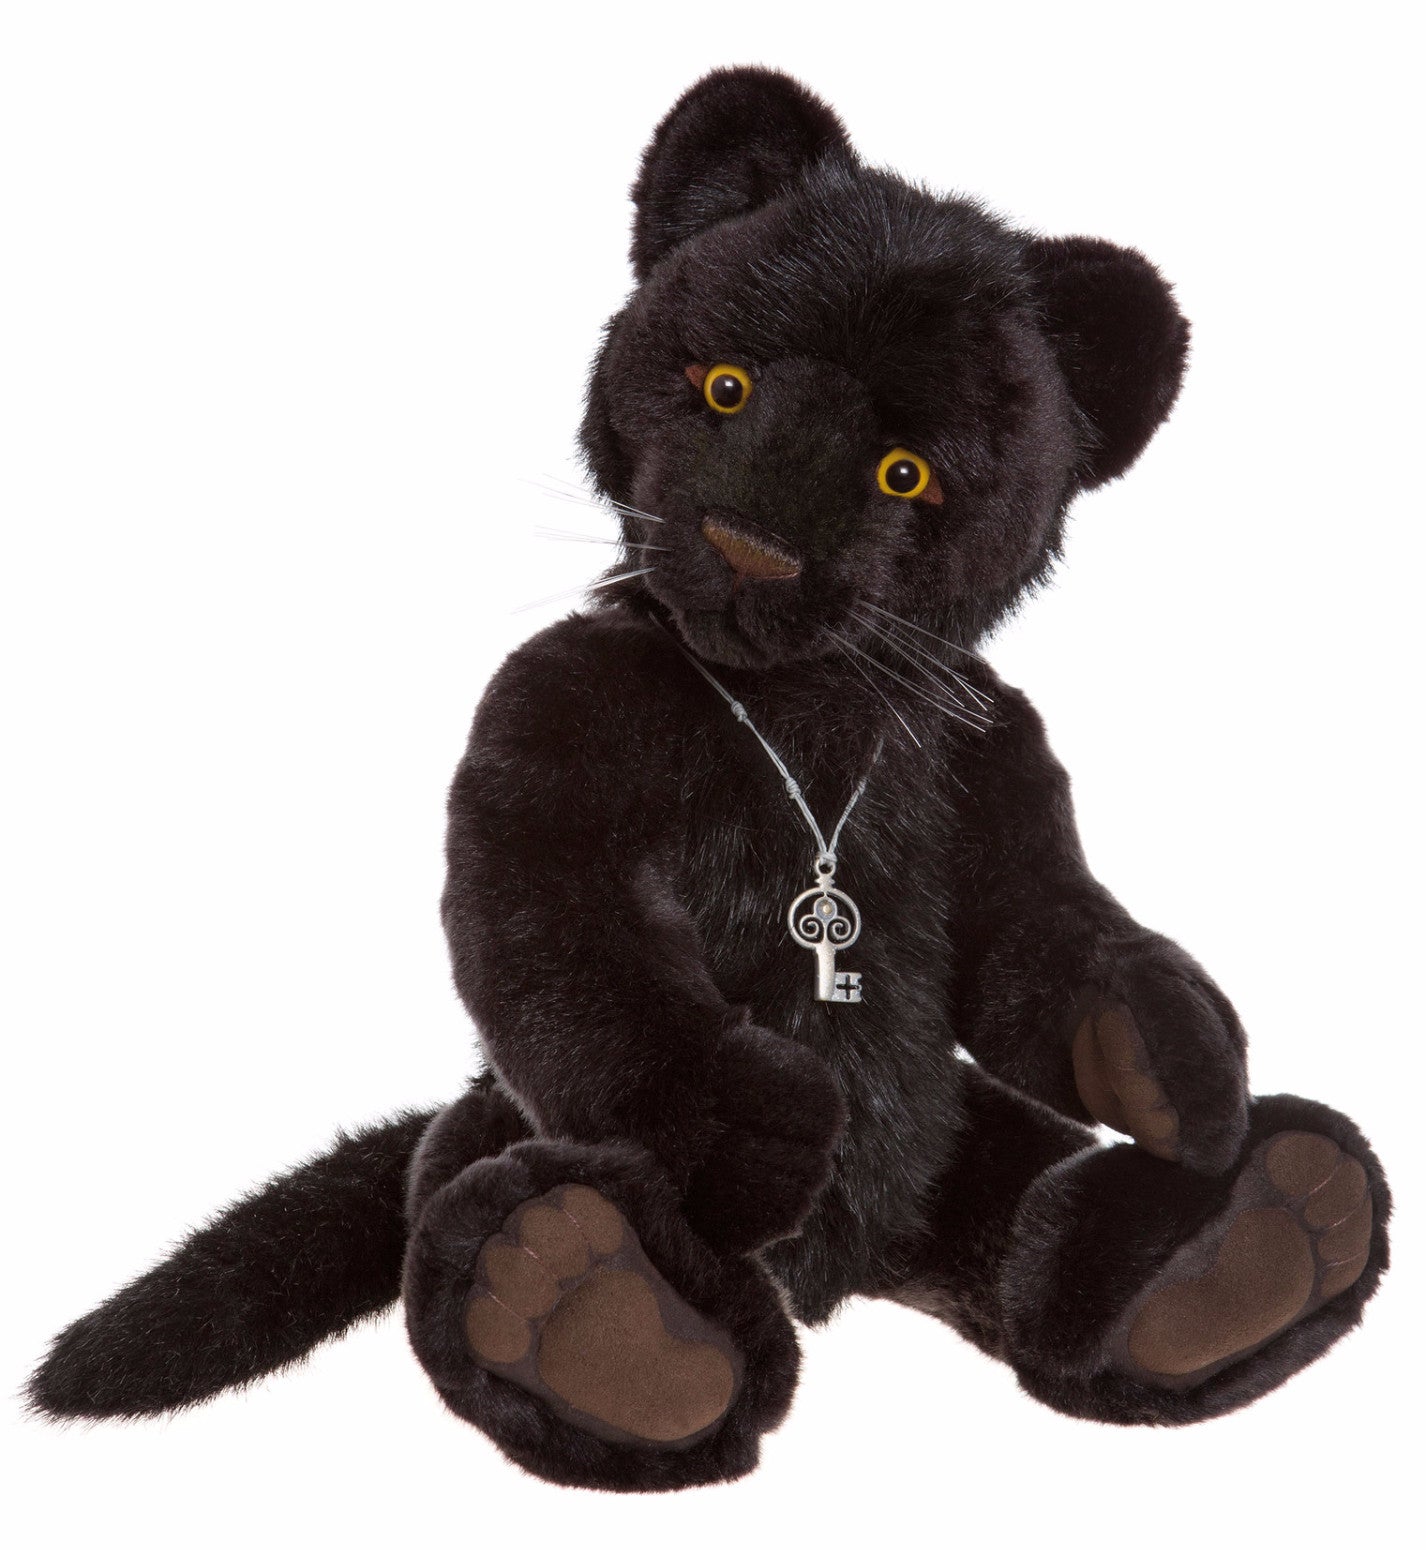 black panther stuffed toy